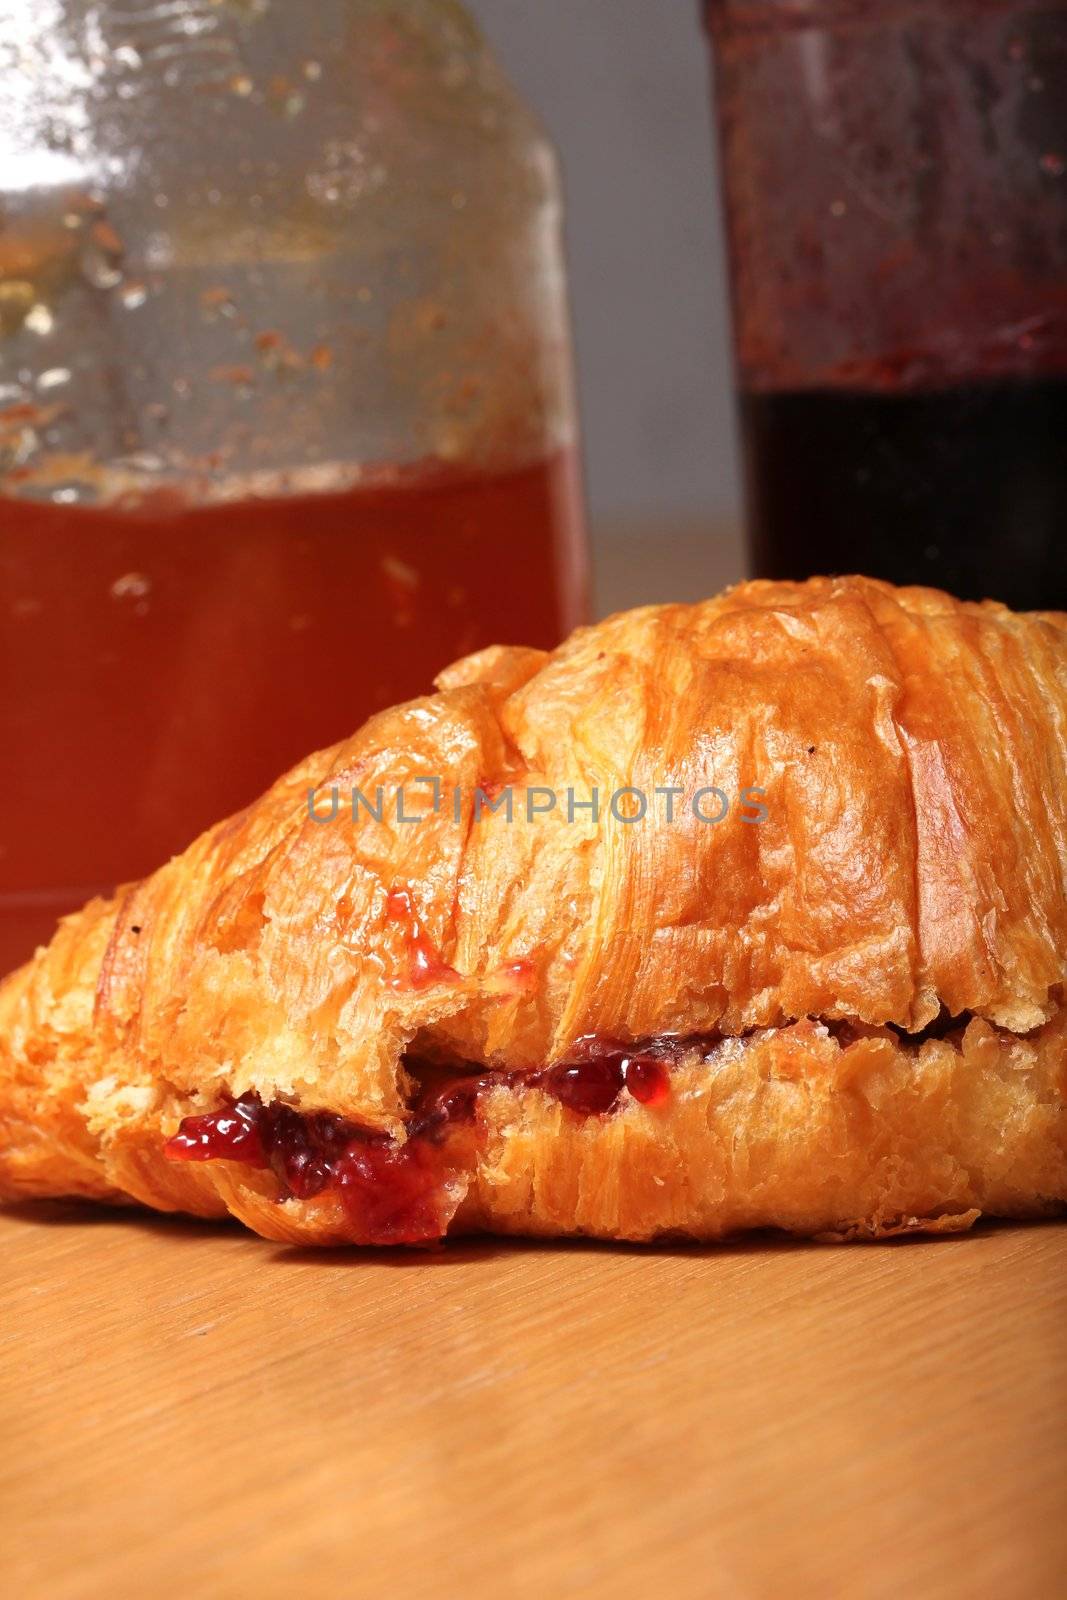 morning croissant with fruit jams